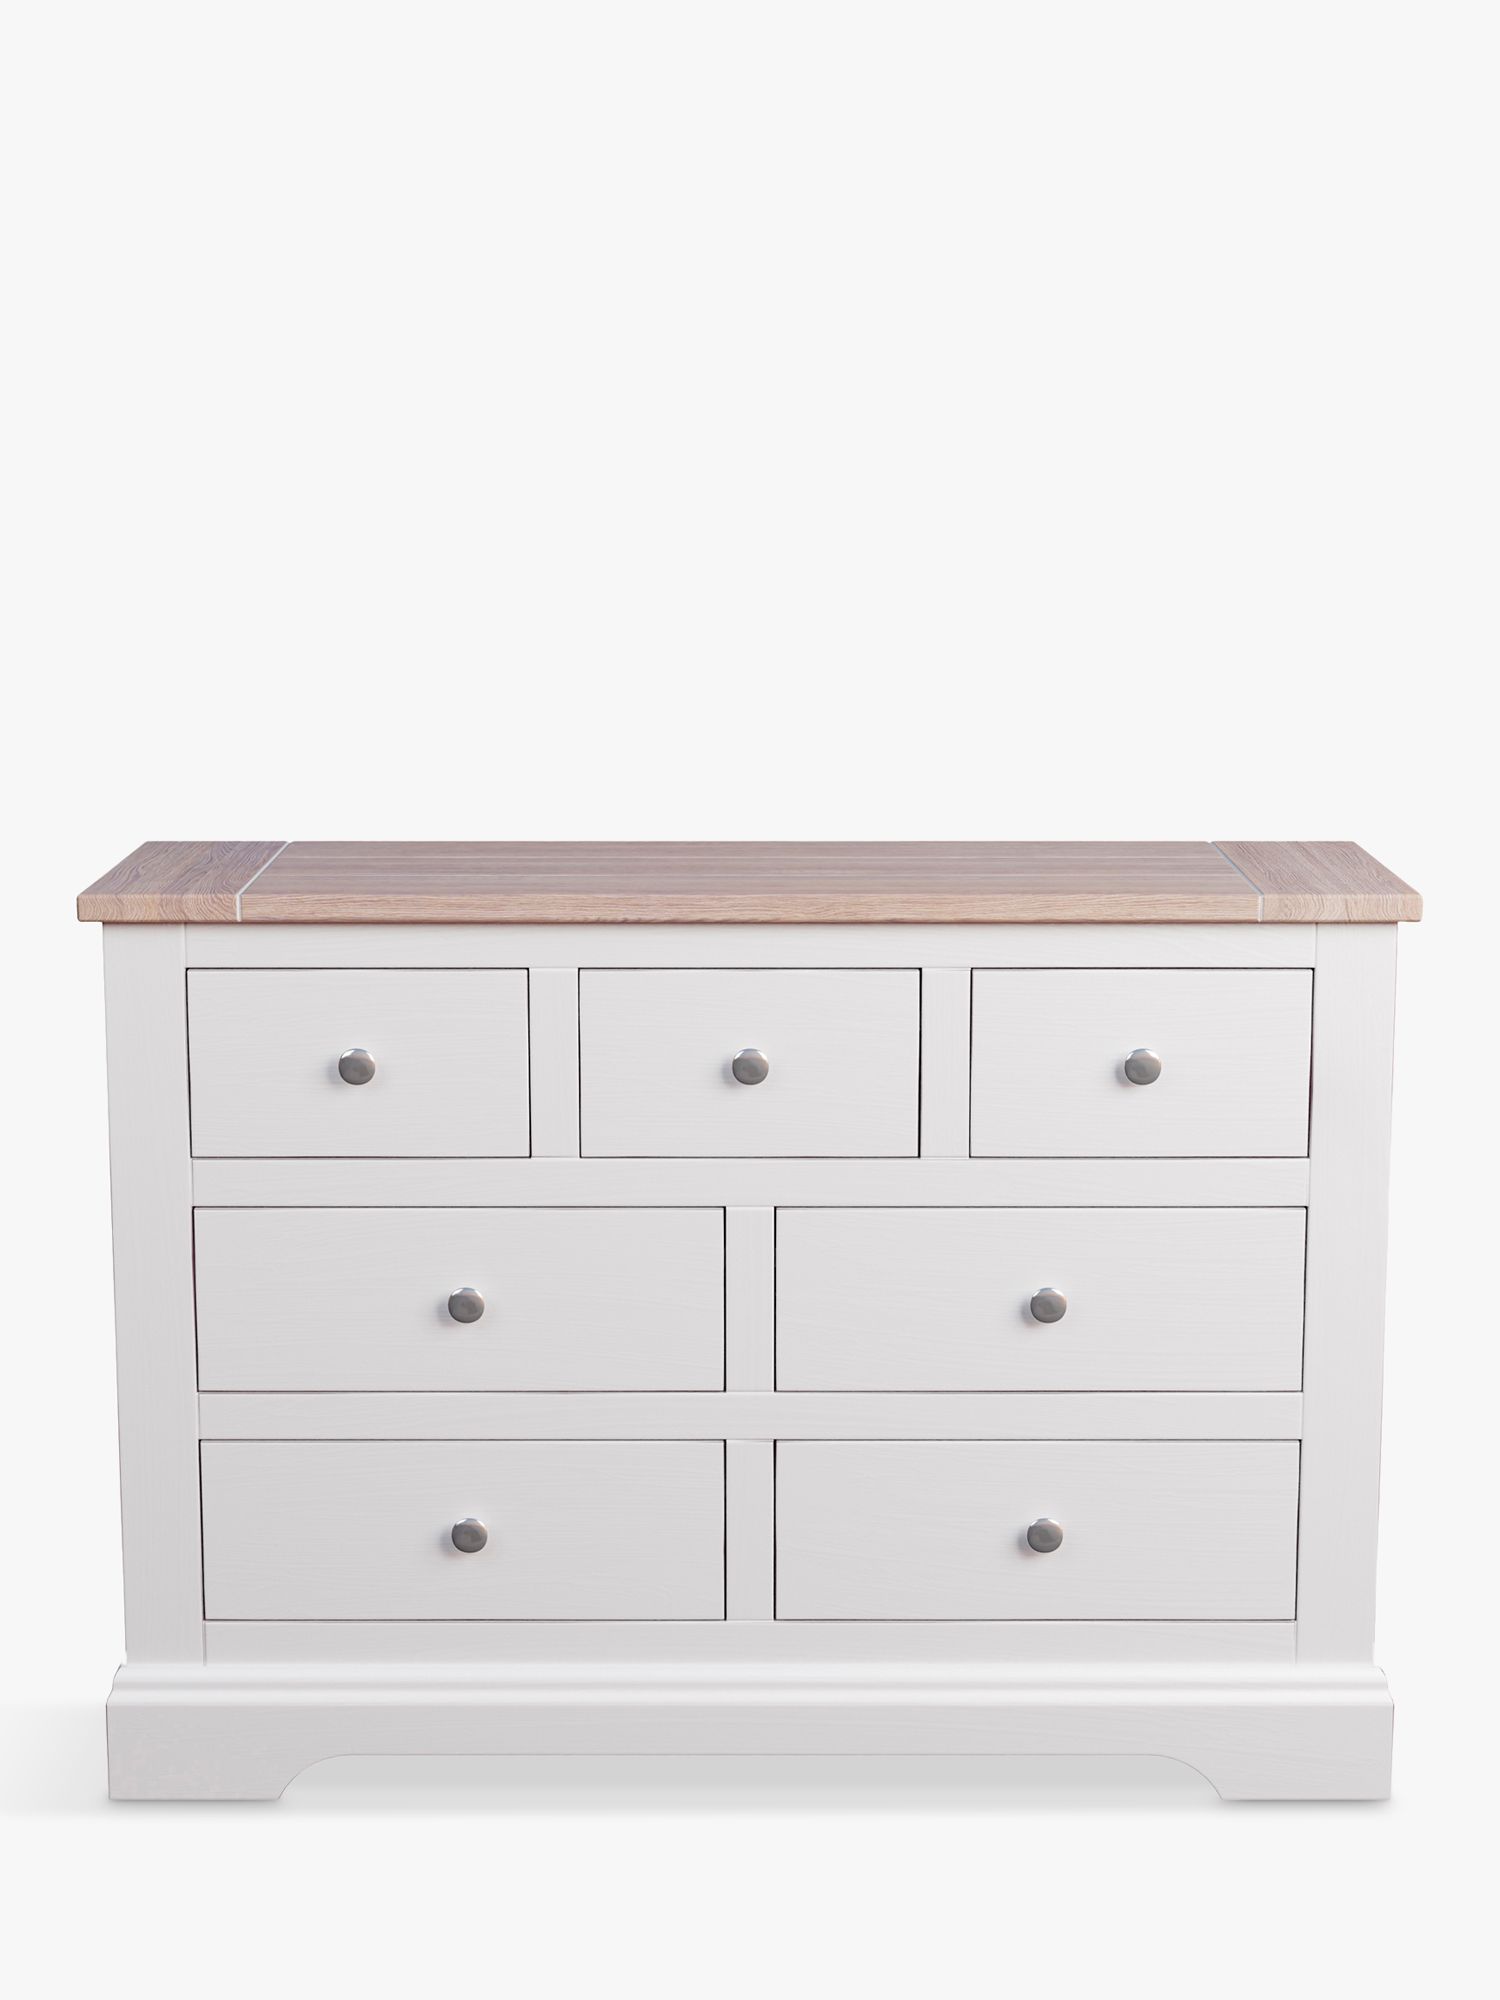 Photo of Laura ashley dorset 7 drawer chest/sideboard white/natural